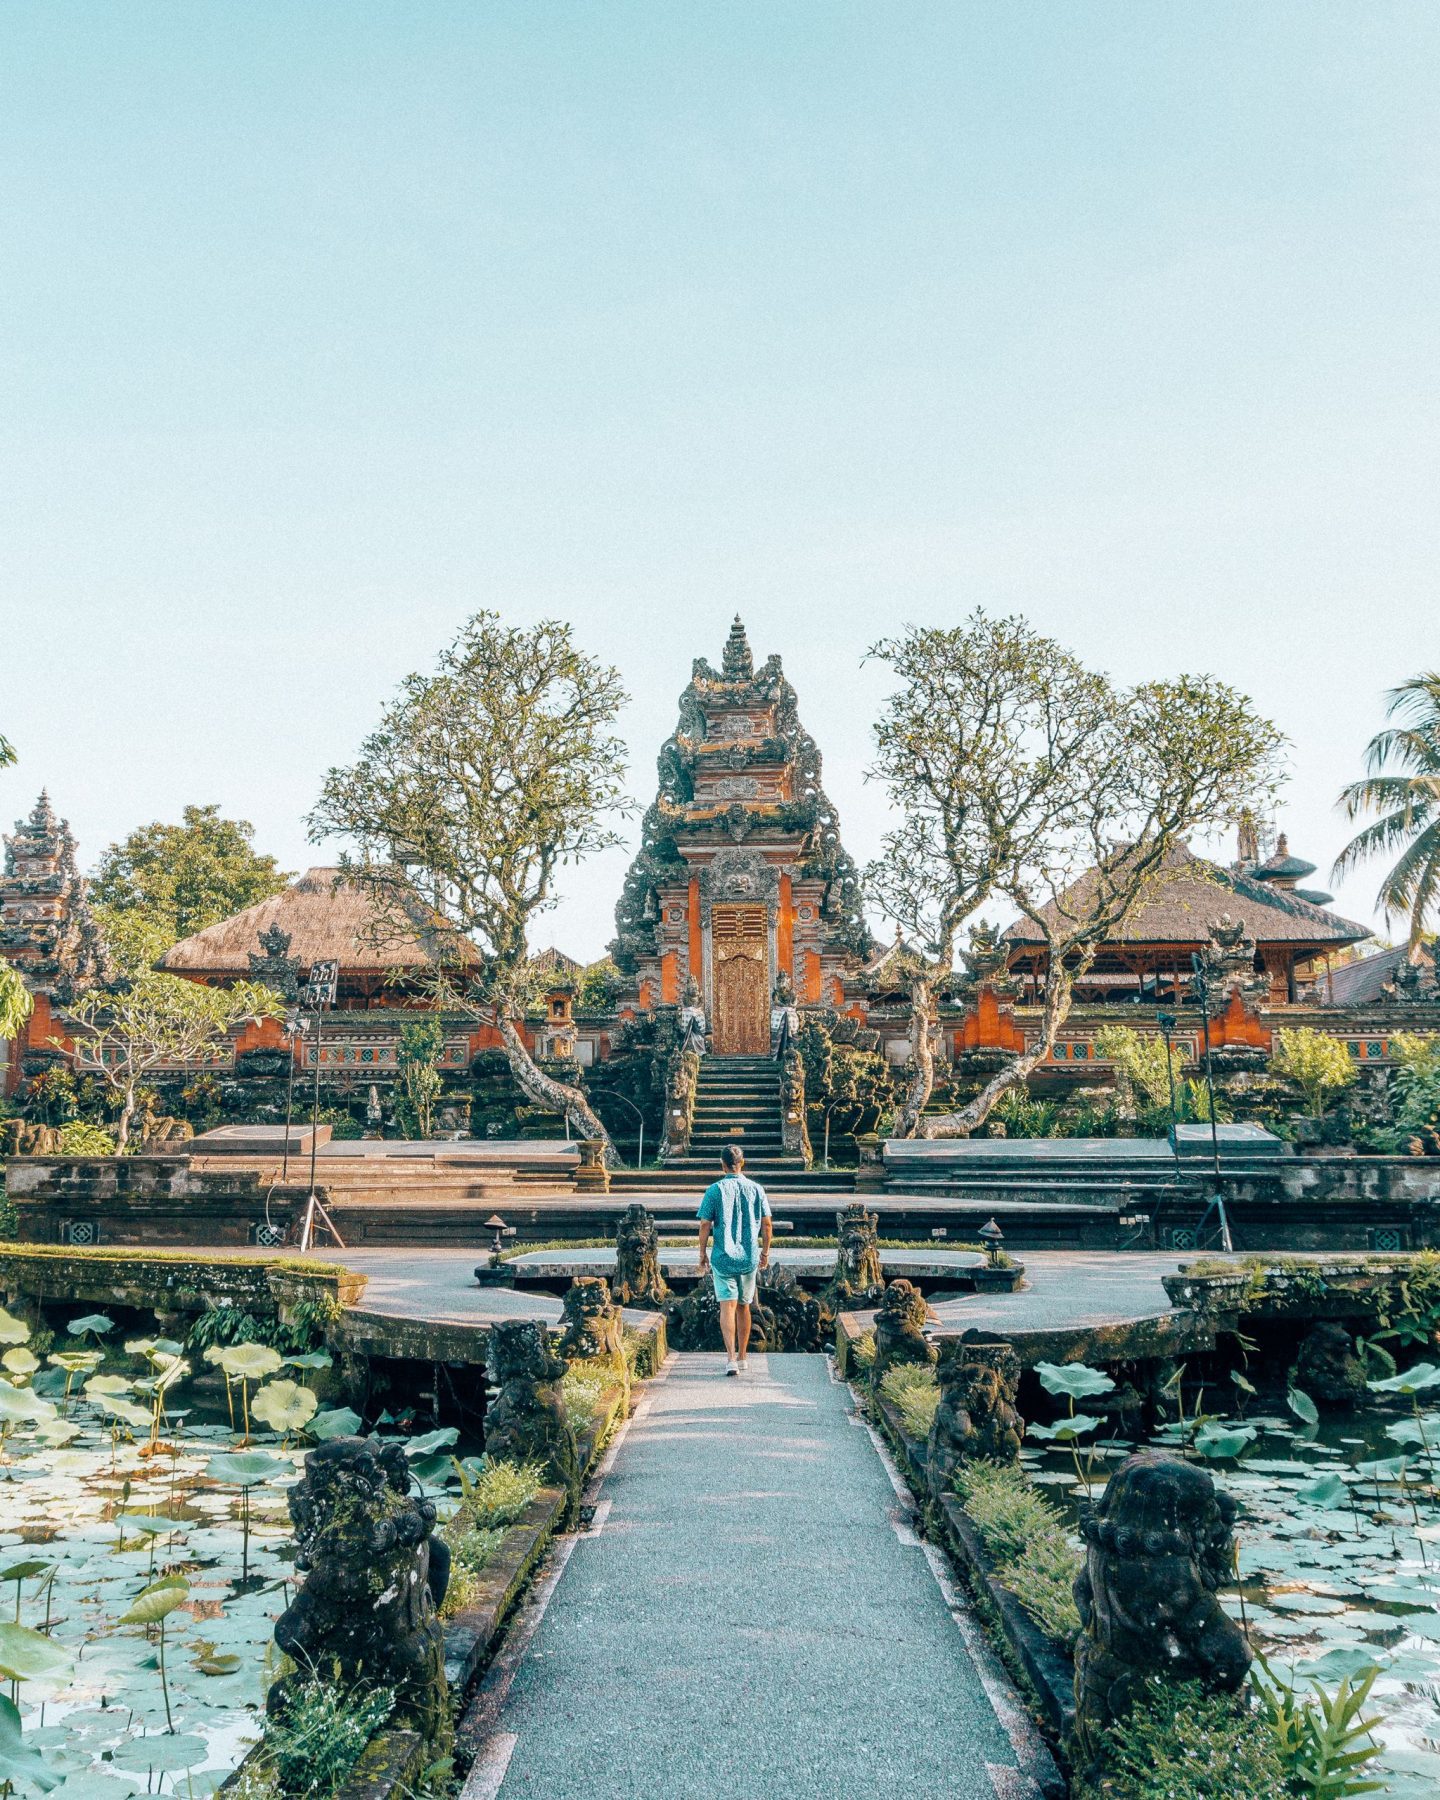 tips for travelling to bali